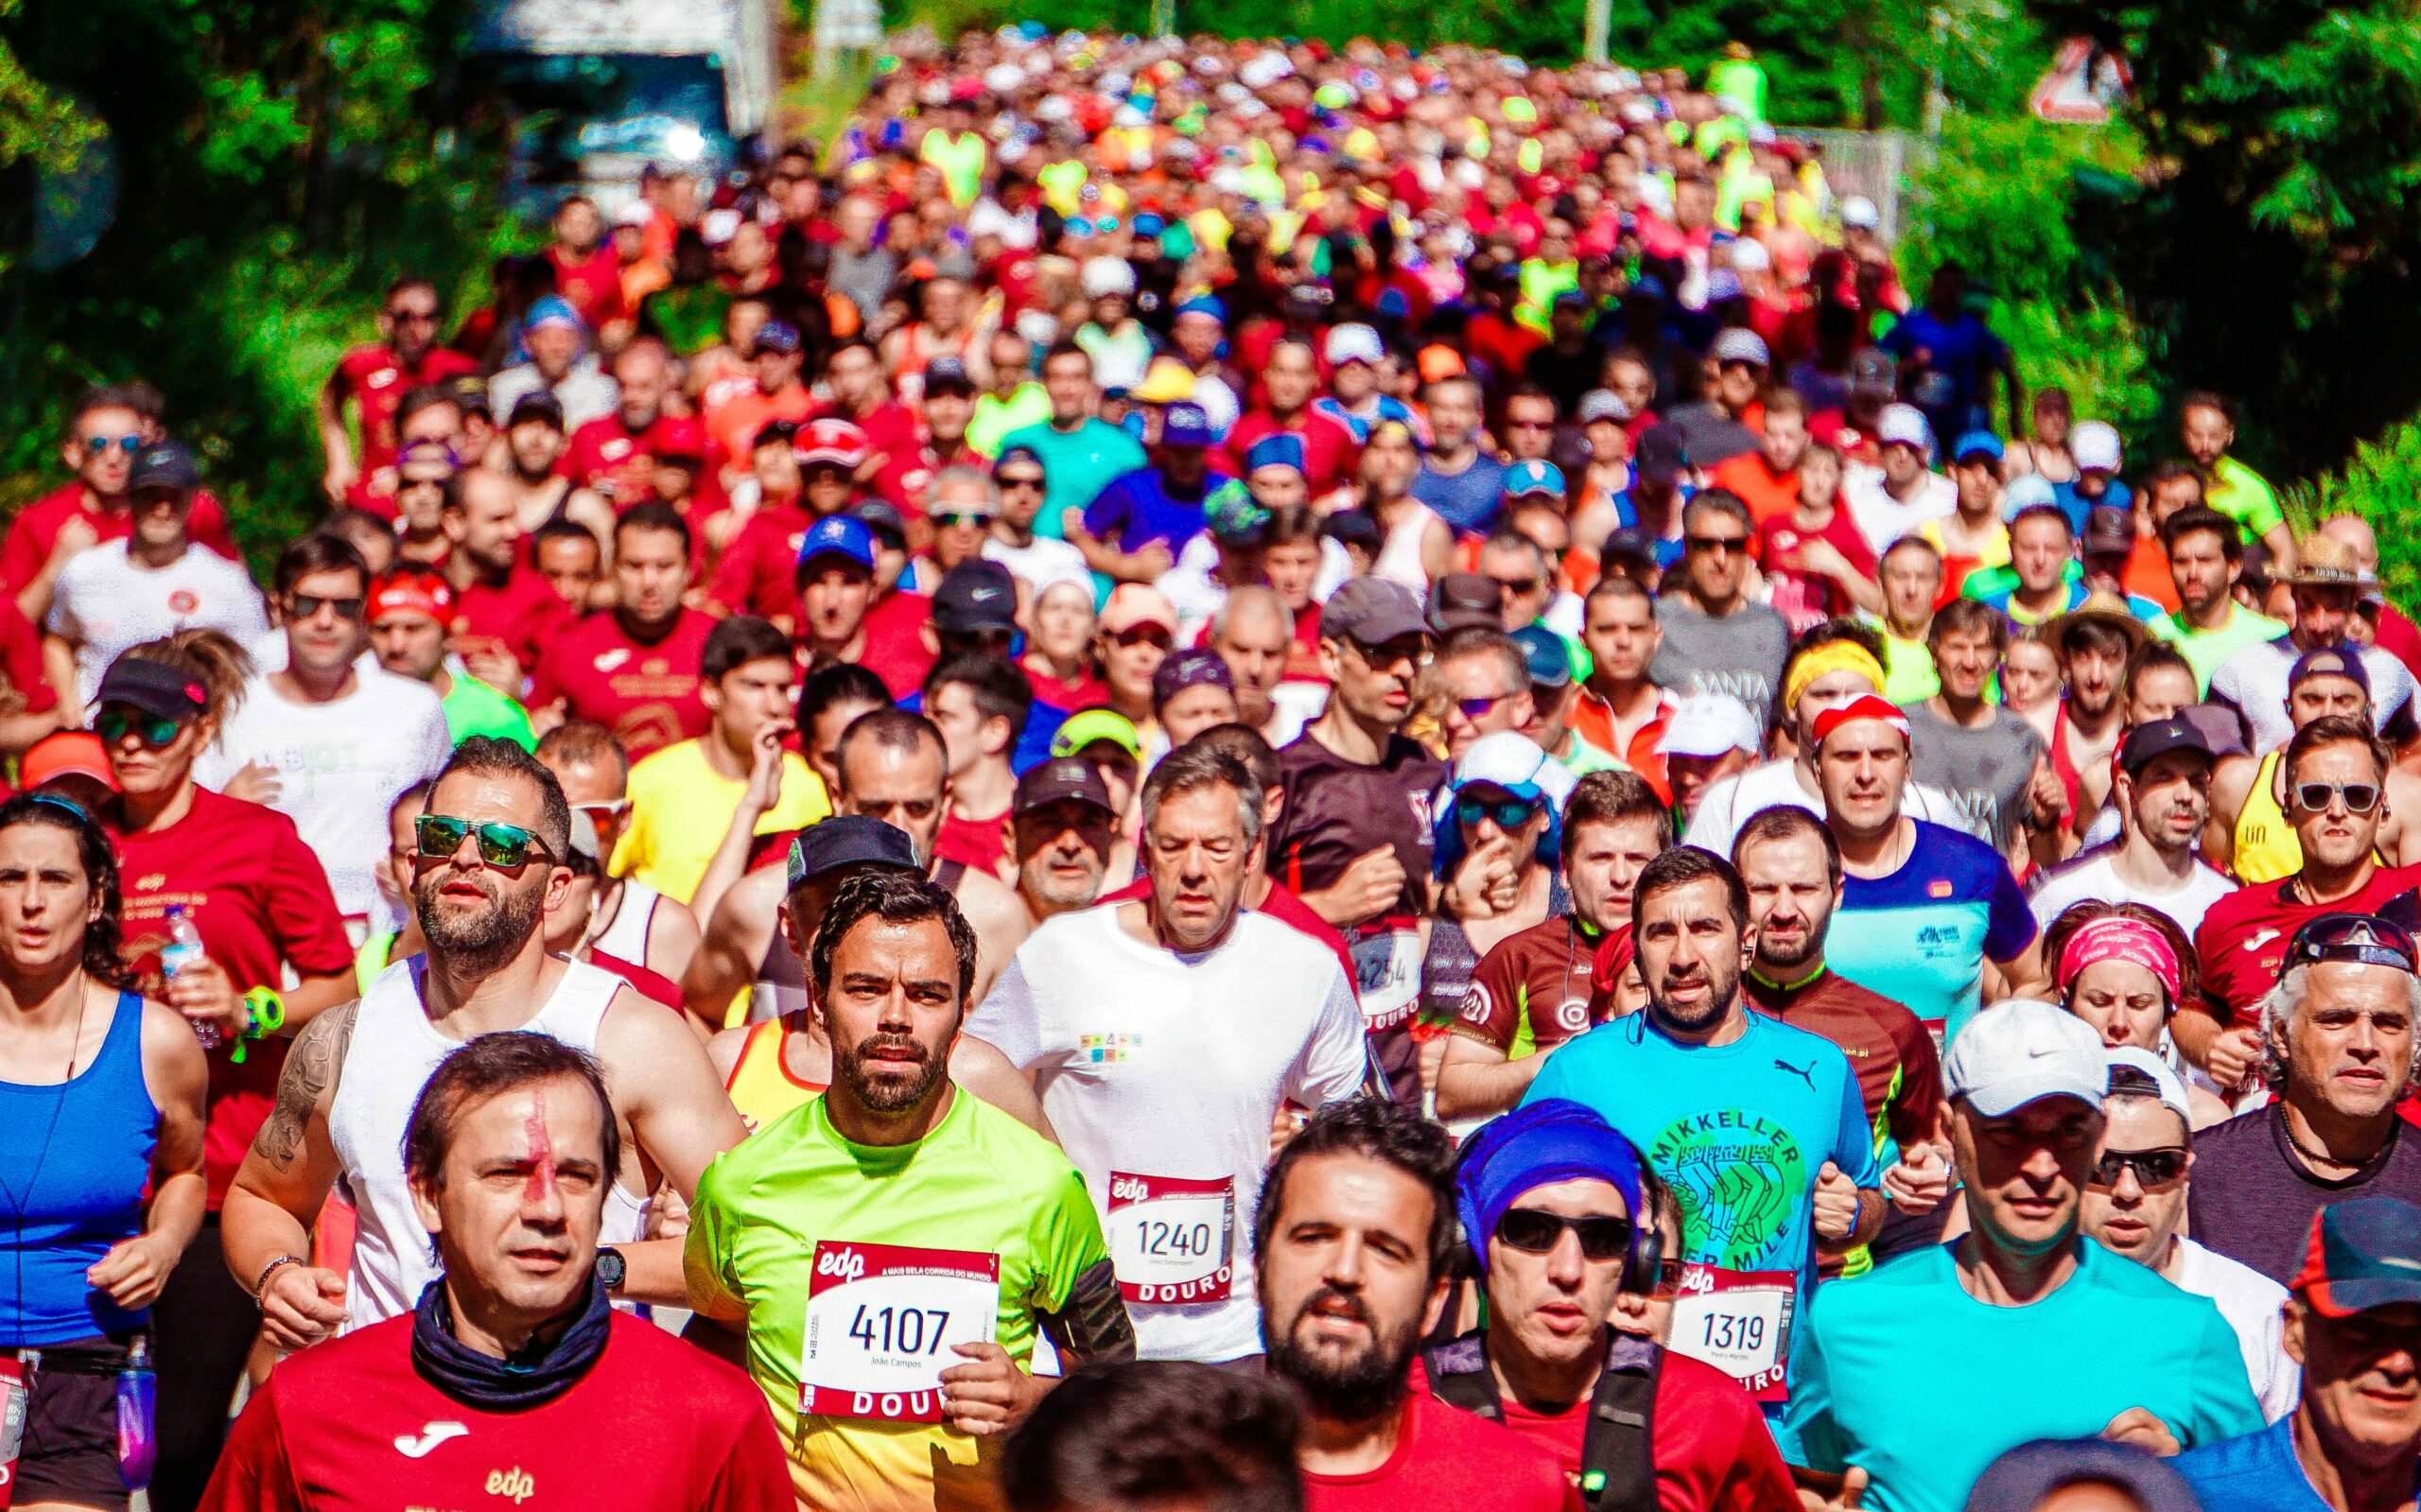 Overview: Fastest marathons in the world